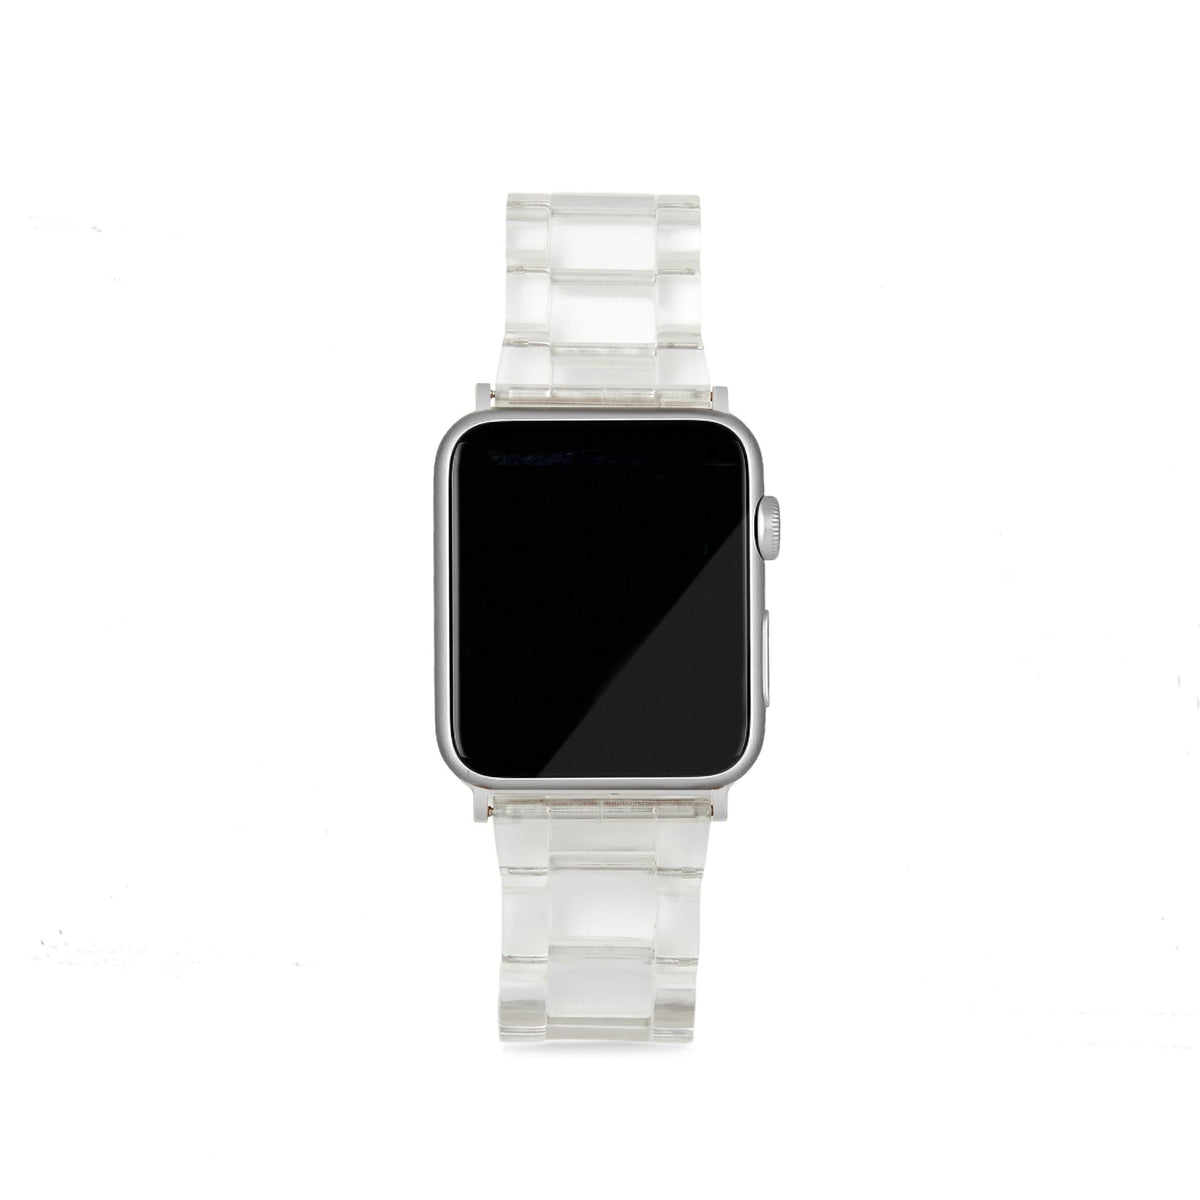 MACHETE Apple Watch Band Set in Clear Outlet